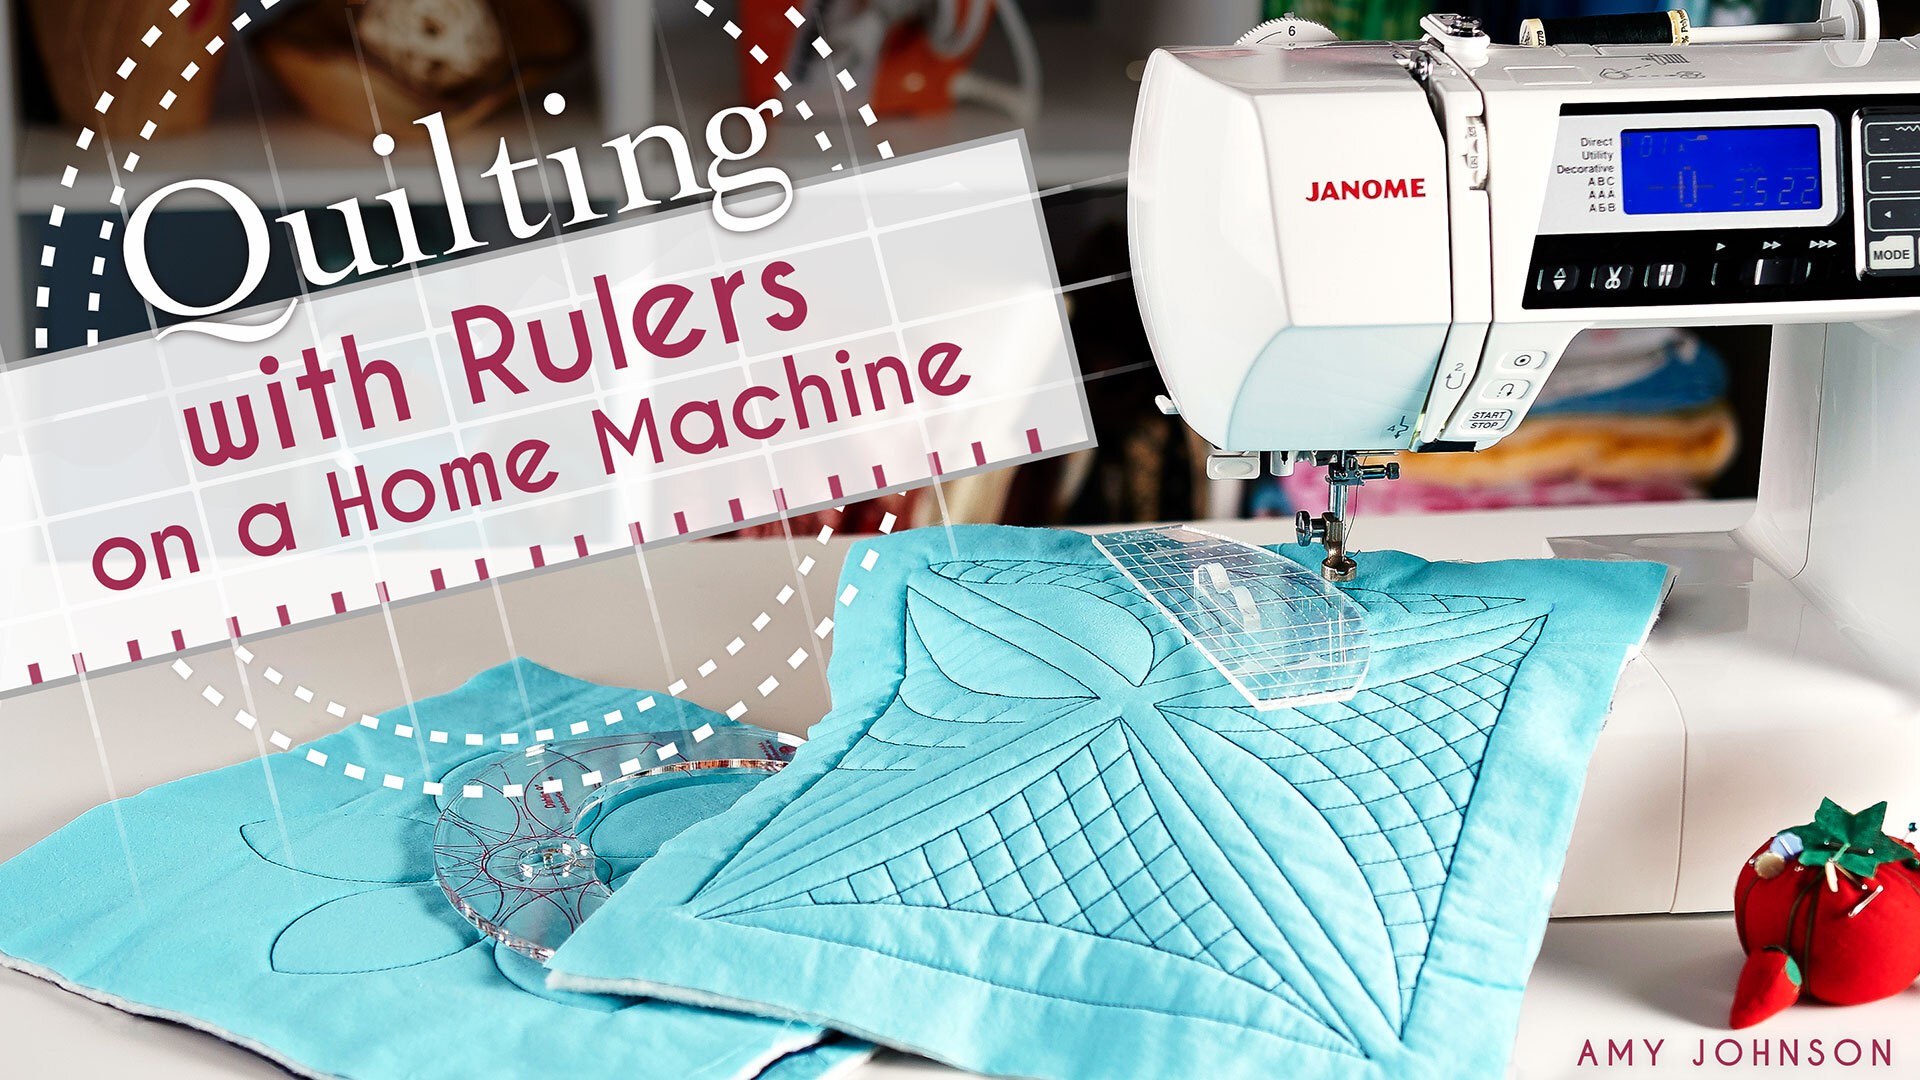 Quilting With Rulers on Home Machine |